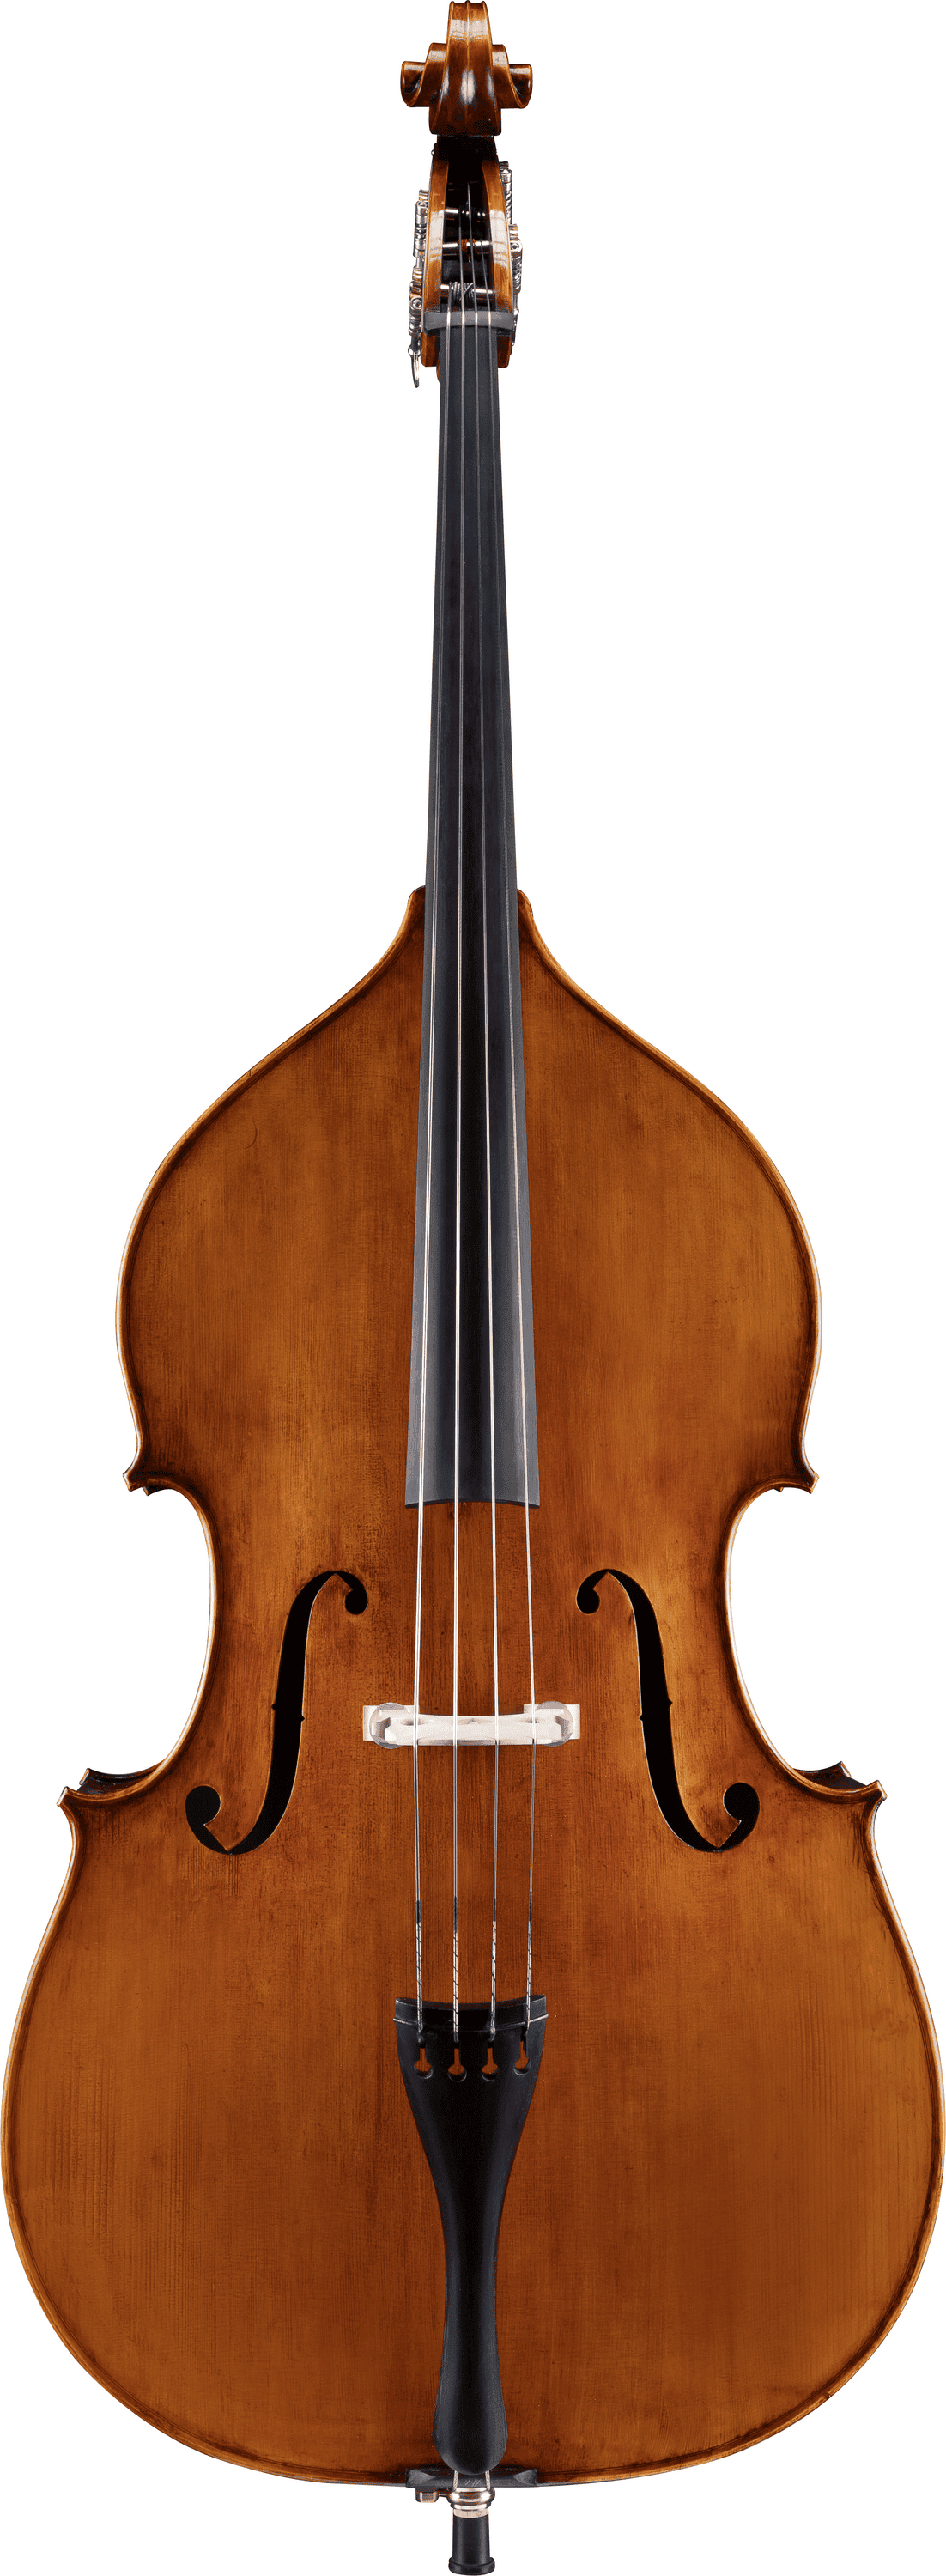 Eastman Master Series VB605 Professional Double Bass - 3/4 Size